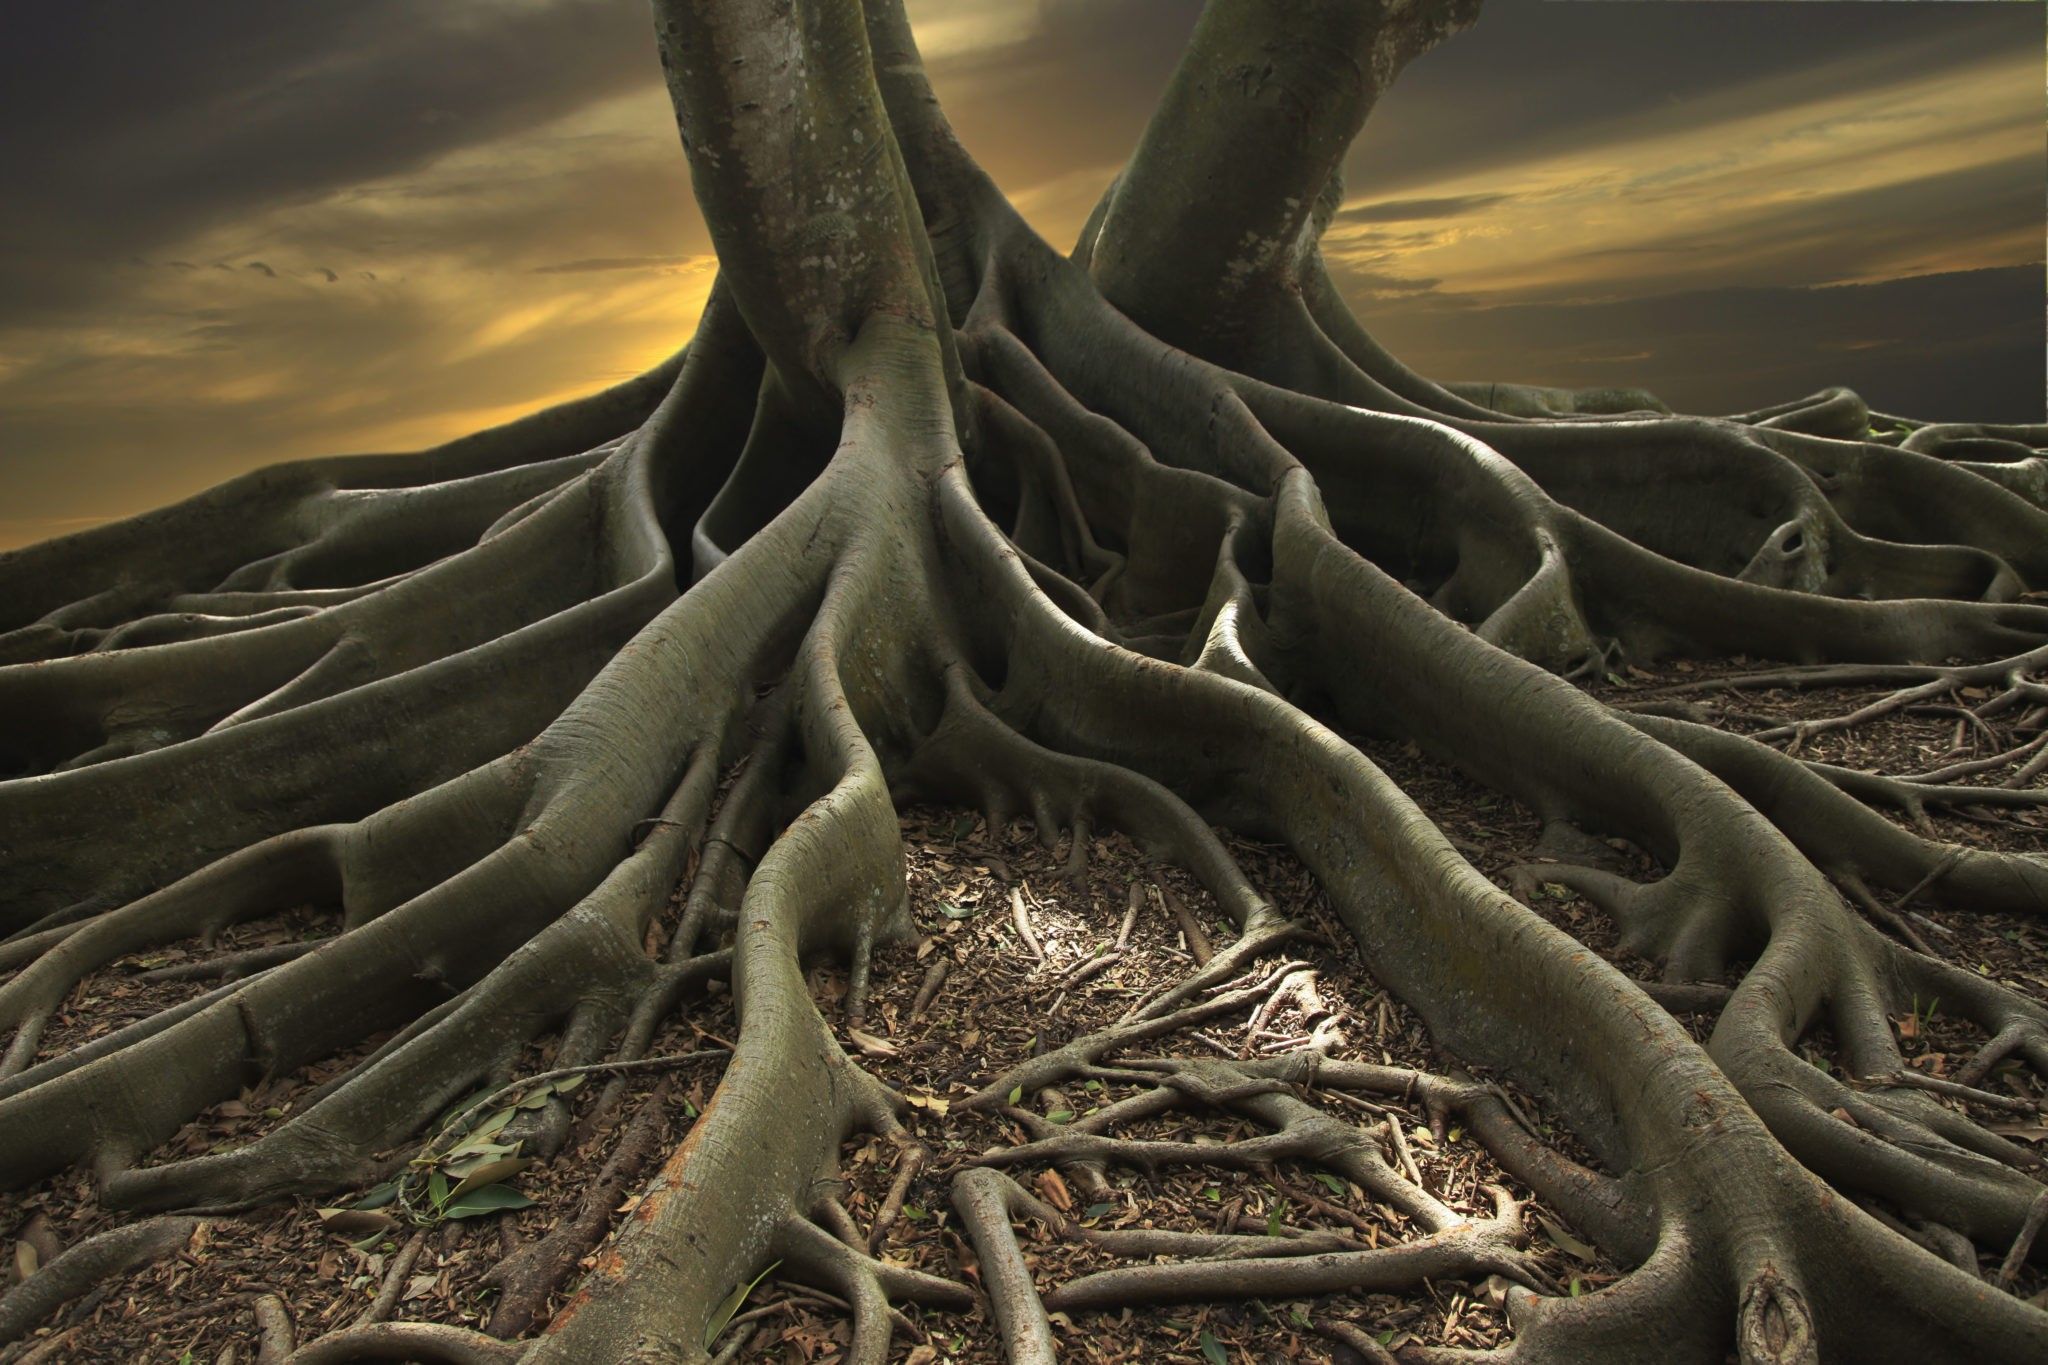 Rediscover your roots: your past carries hints of your professional purpose